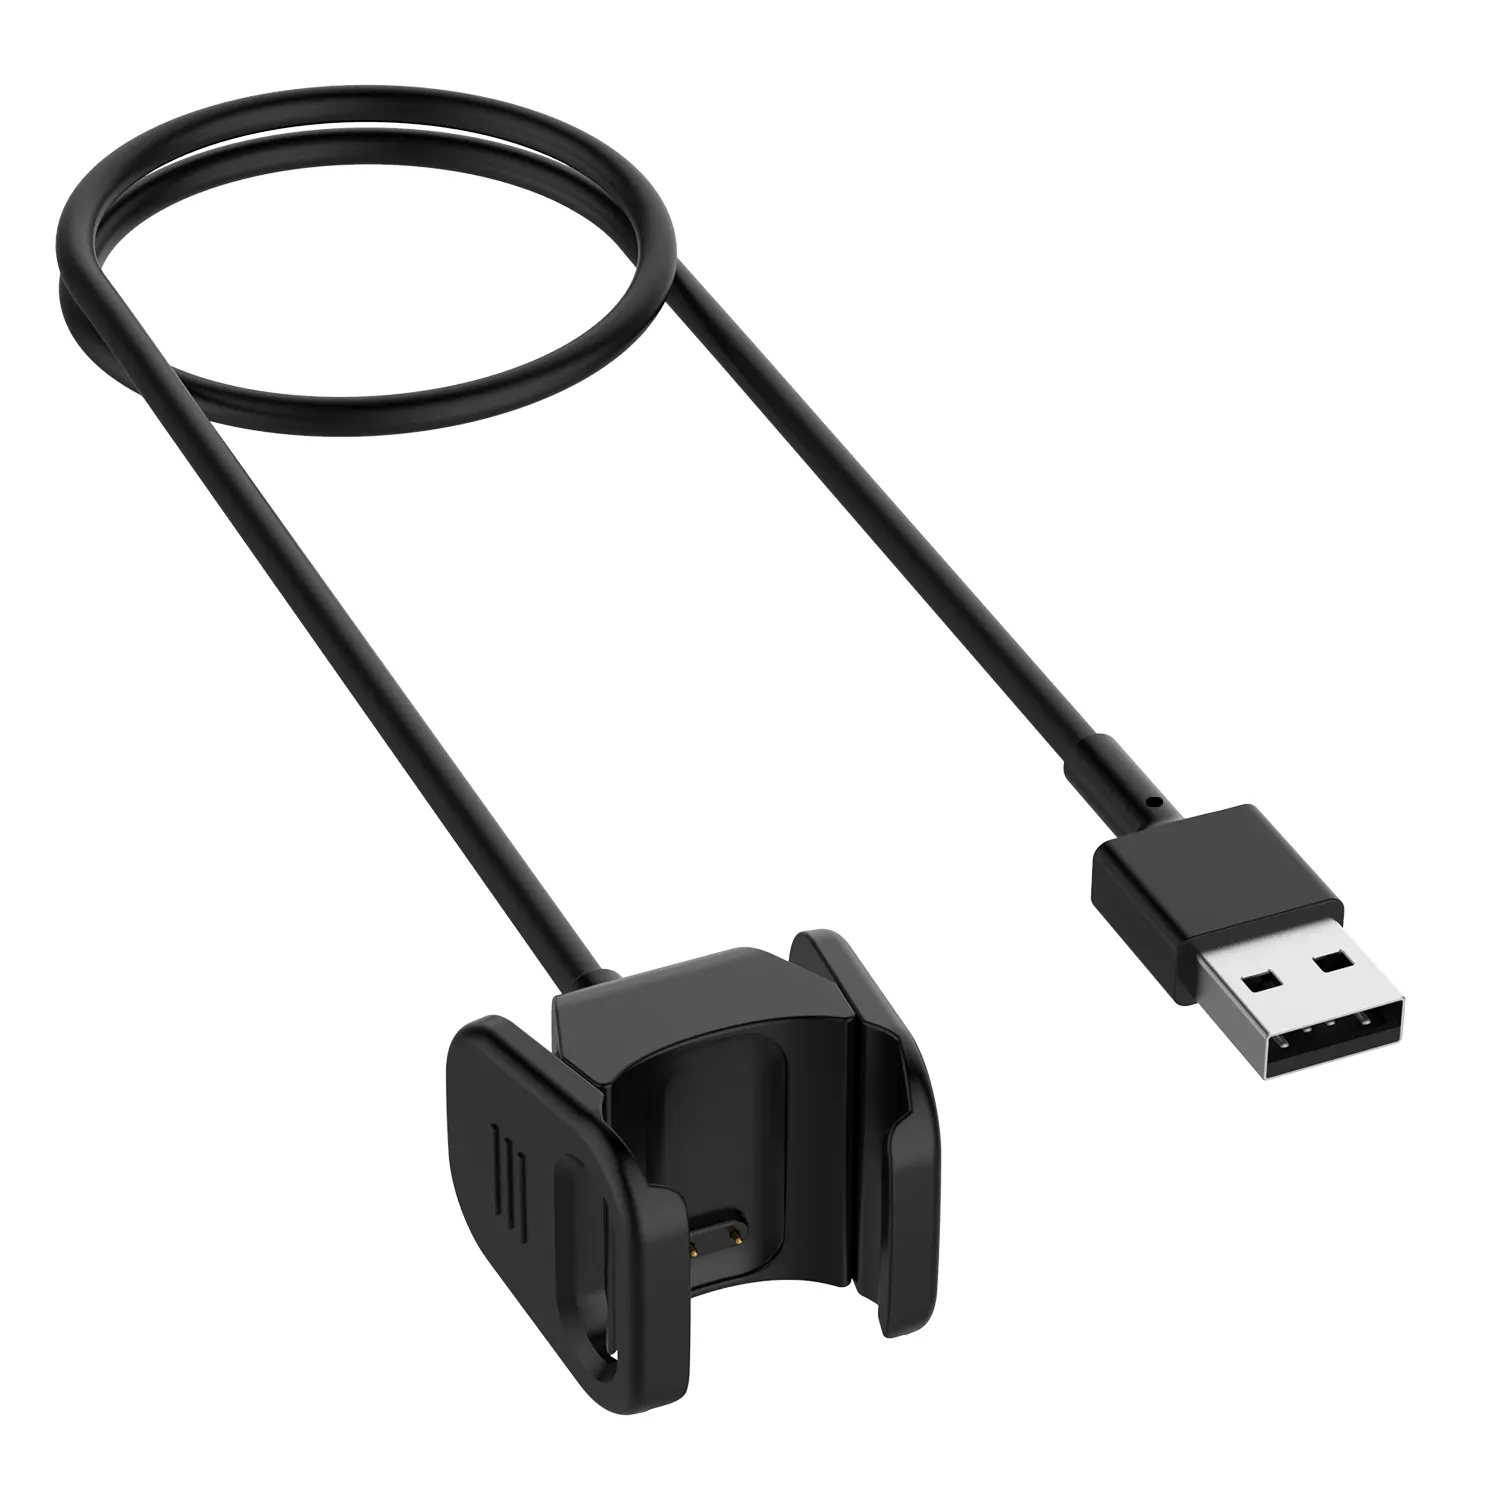 USB Charger For Fitbit Charge 4/3 Activity Wristband USB Charging Cable Cord Wire